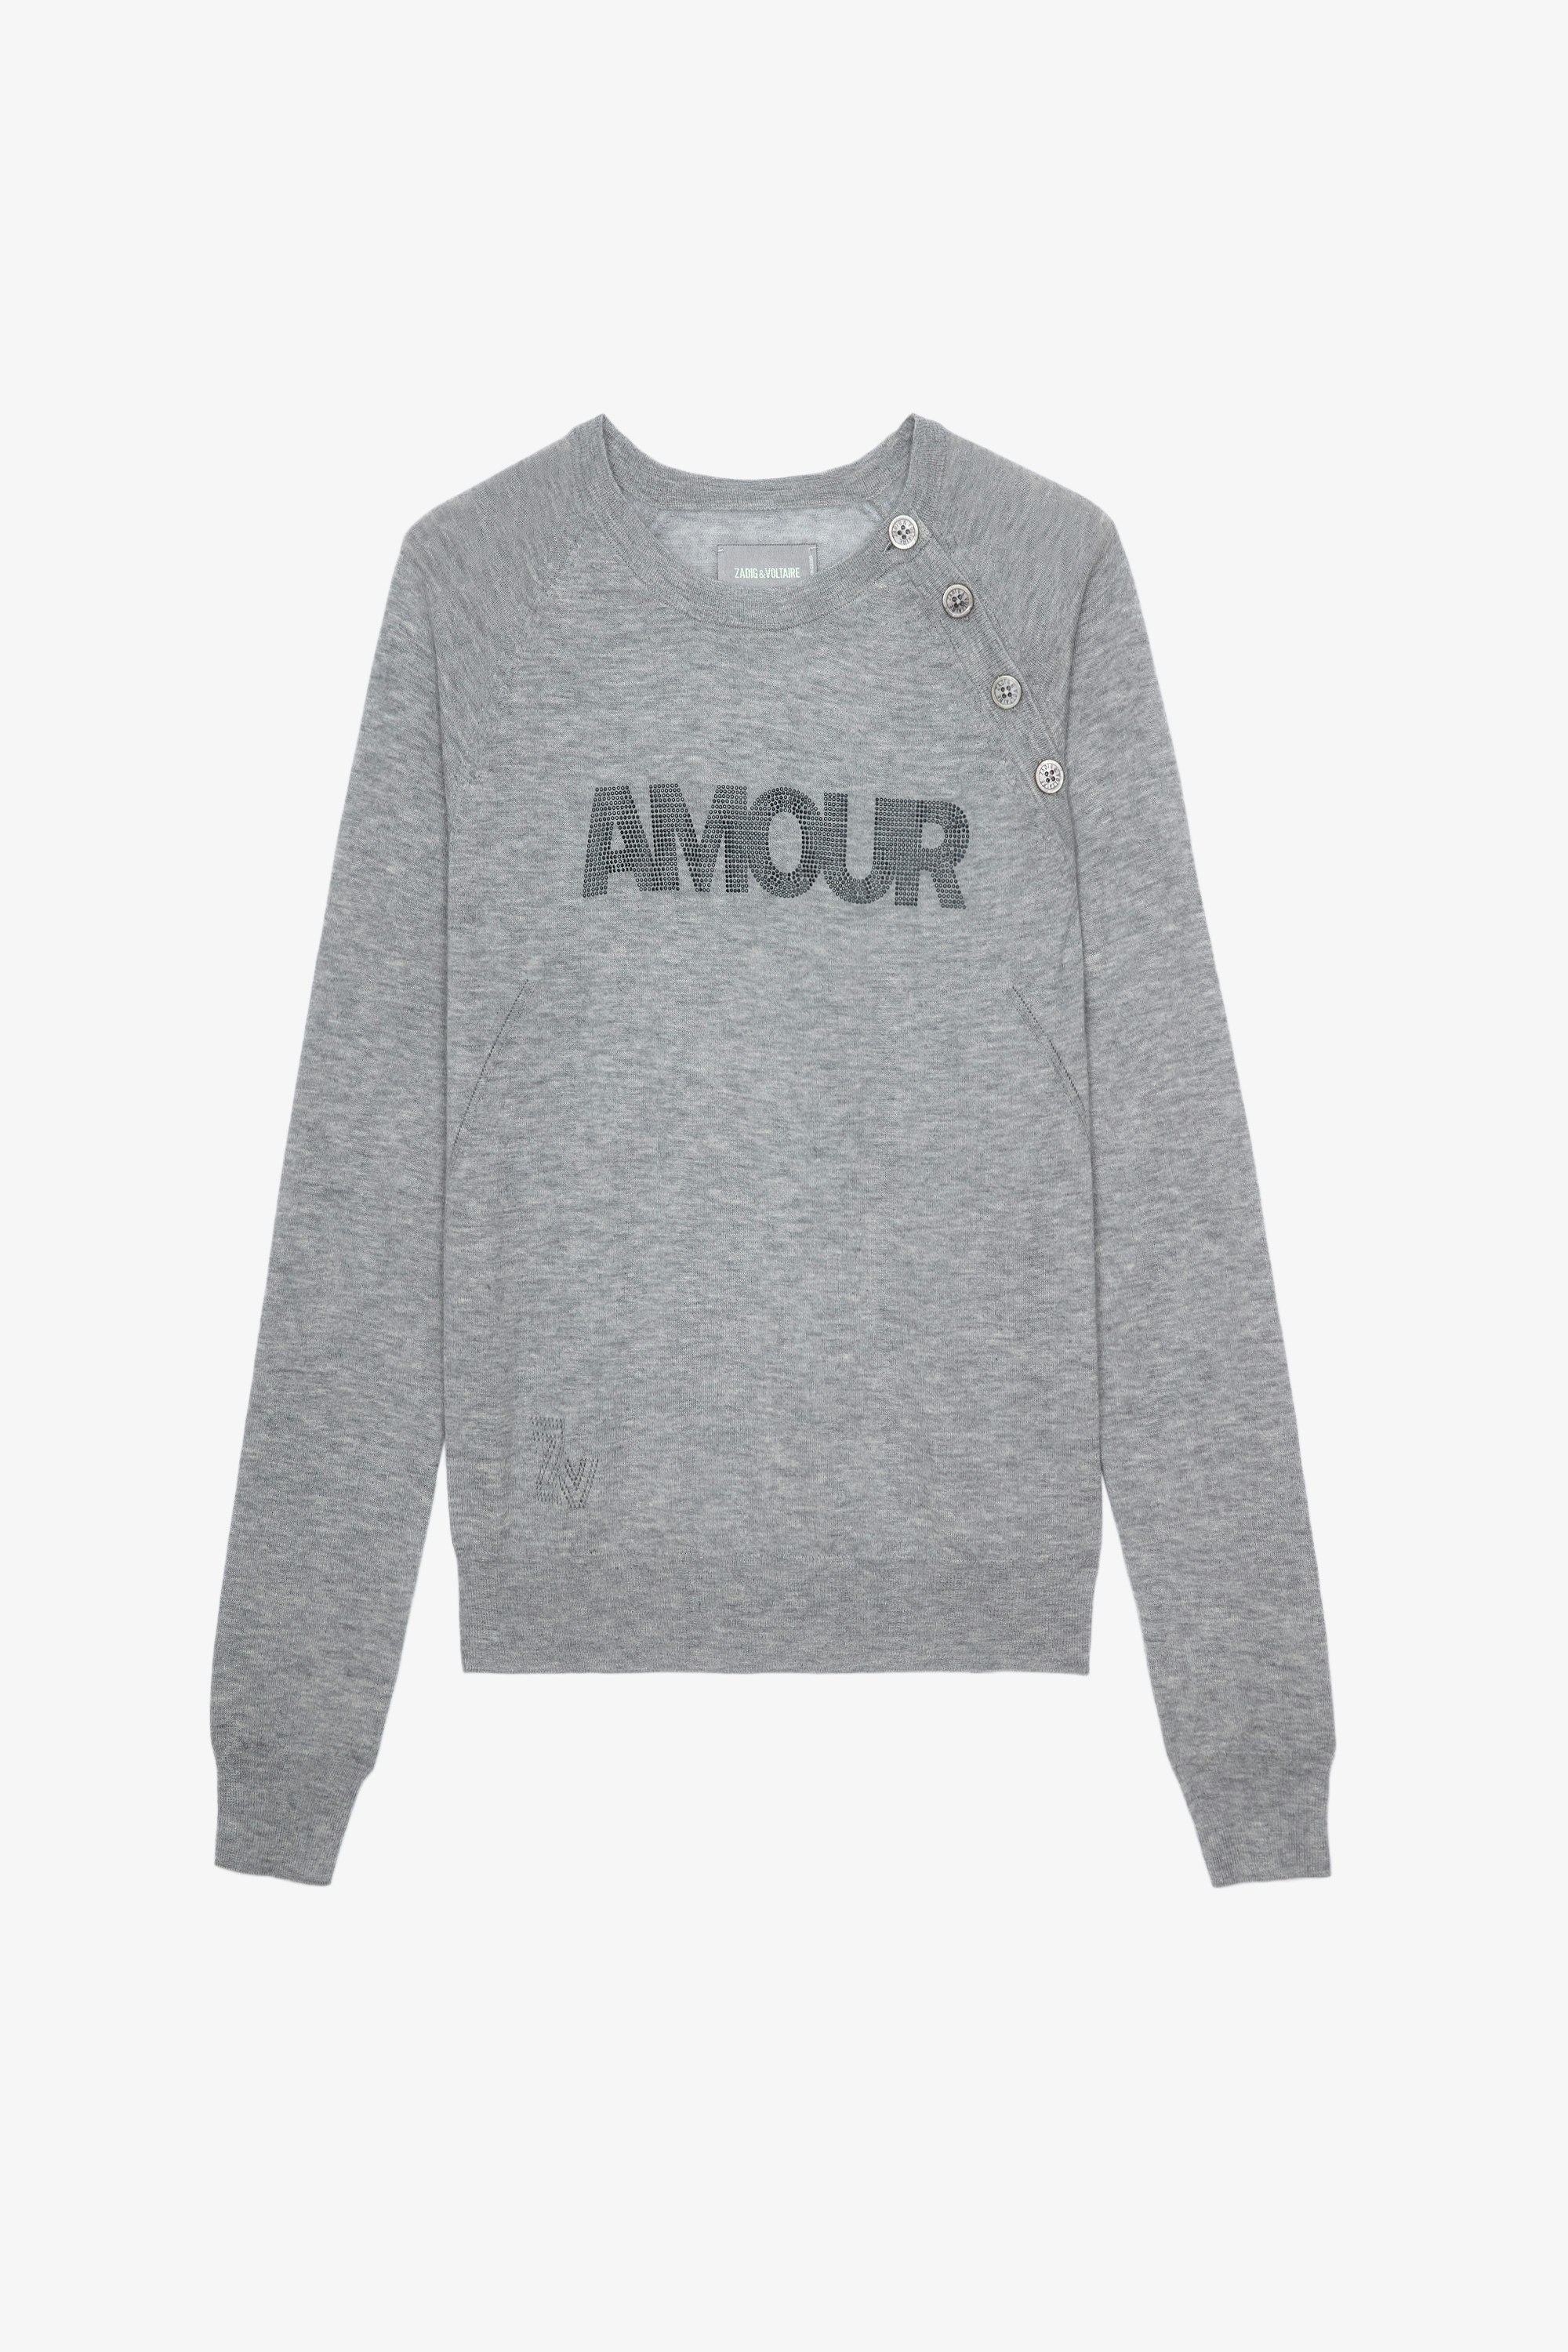 Regliss カシミヤ ニット Women’s grey cashmere jumper with “Amour” slogan and button detailing